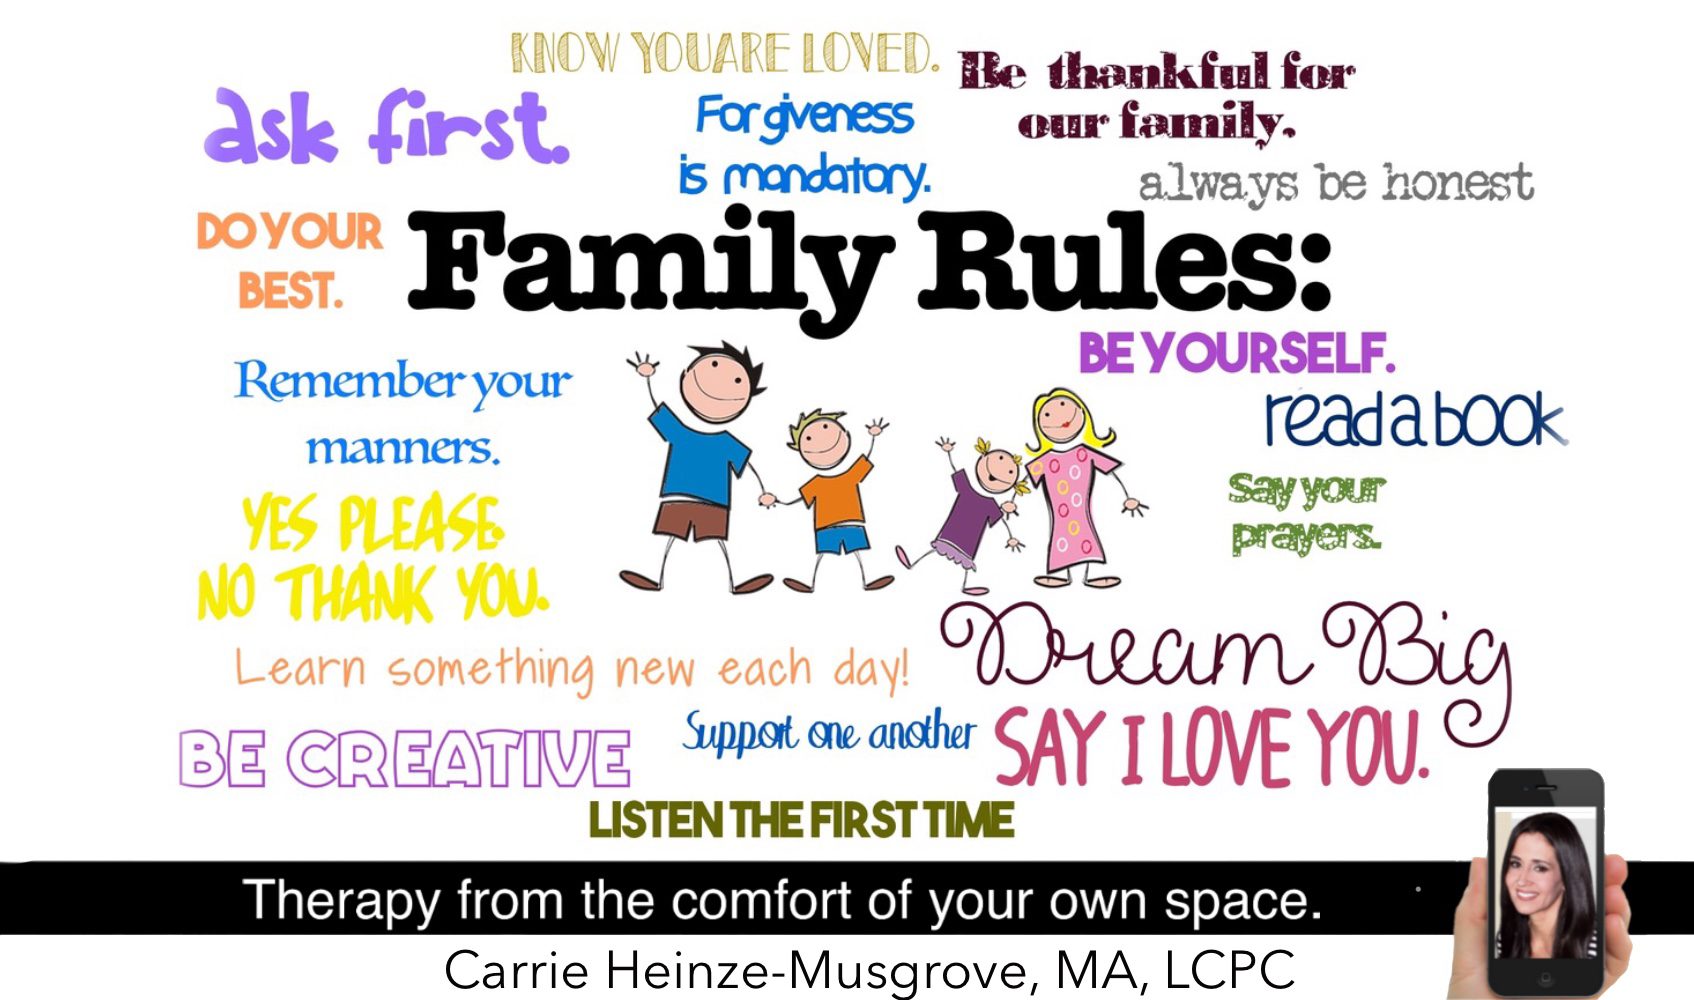 What Were the Rules in Your Family?